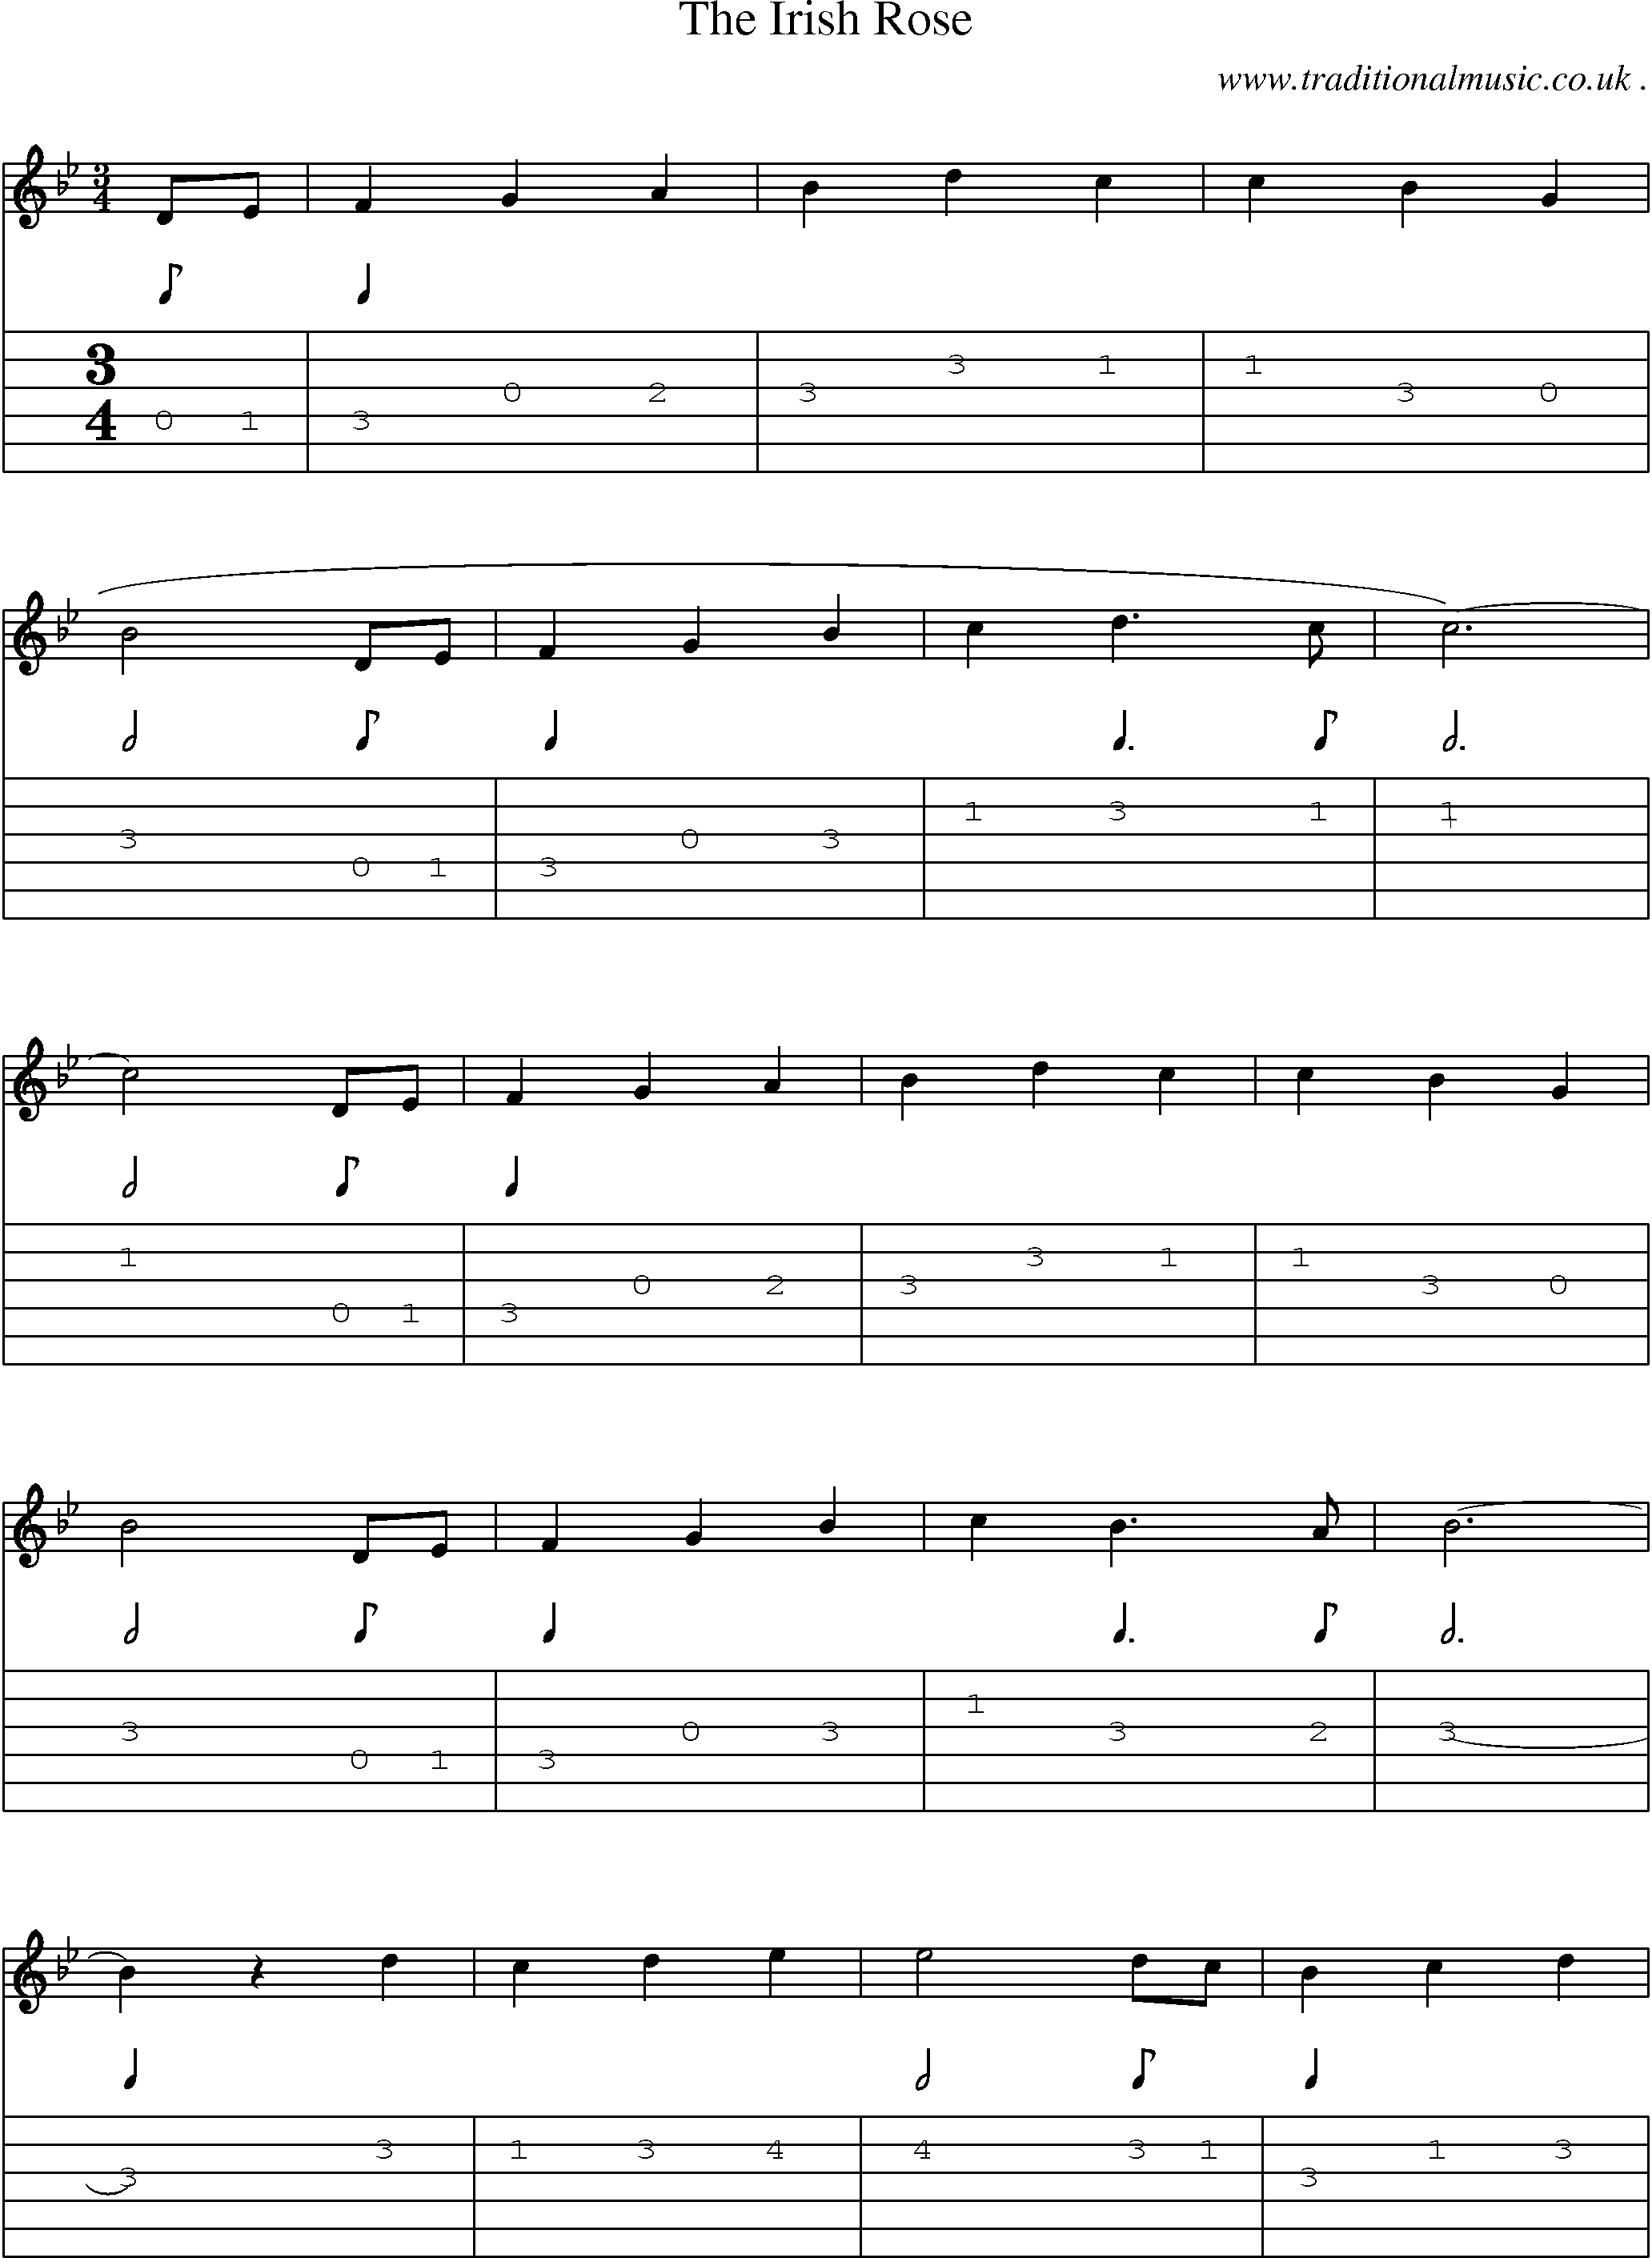 Sheet-Music and Guitar Tabs for The Irish Rose